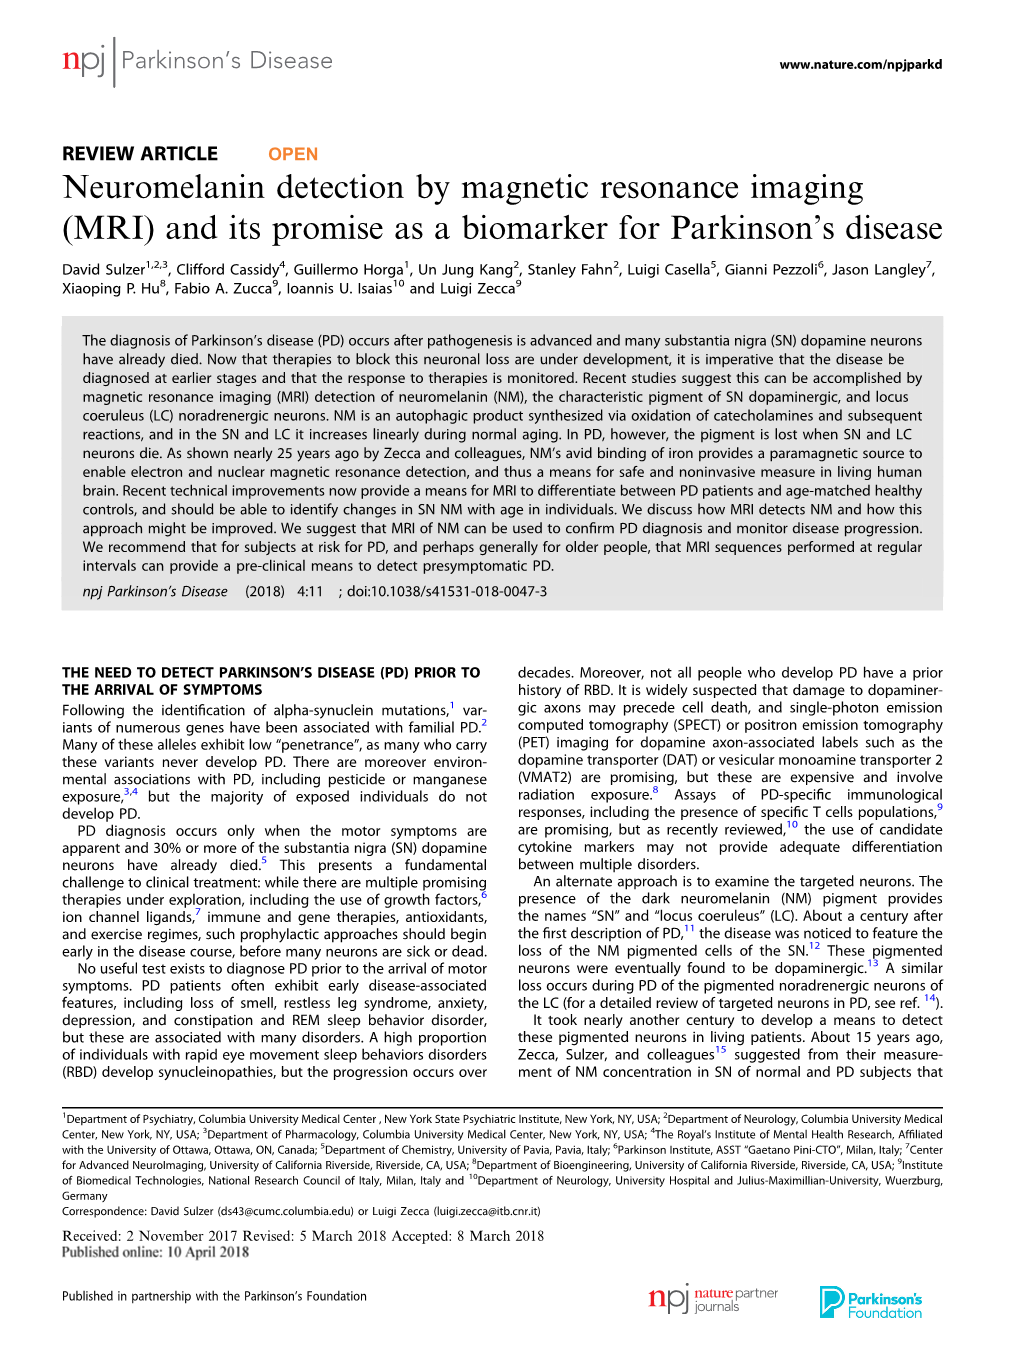 Neuromelanin Detection by Magnetic Resonance Imaging (MRI) and Its Promise As a Biomarker for Parkinson’S Disease